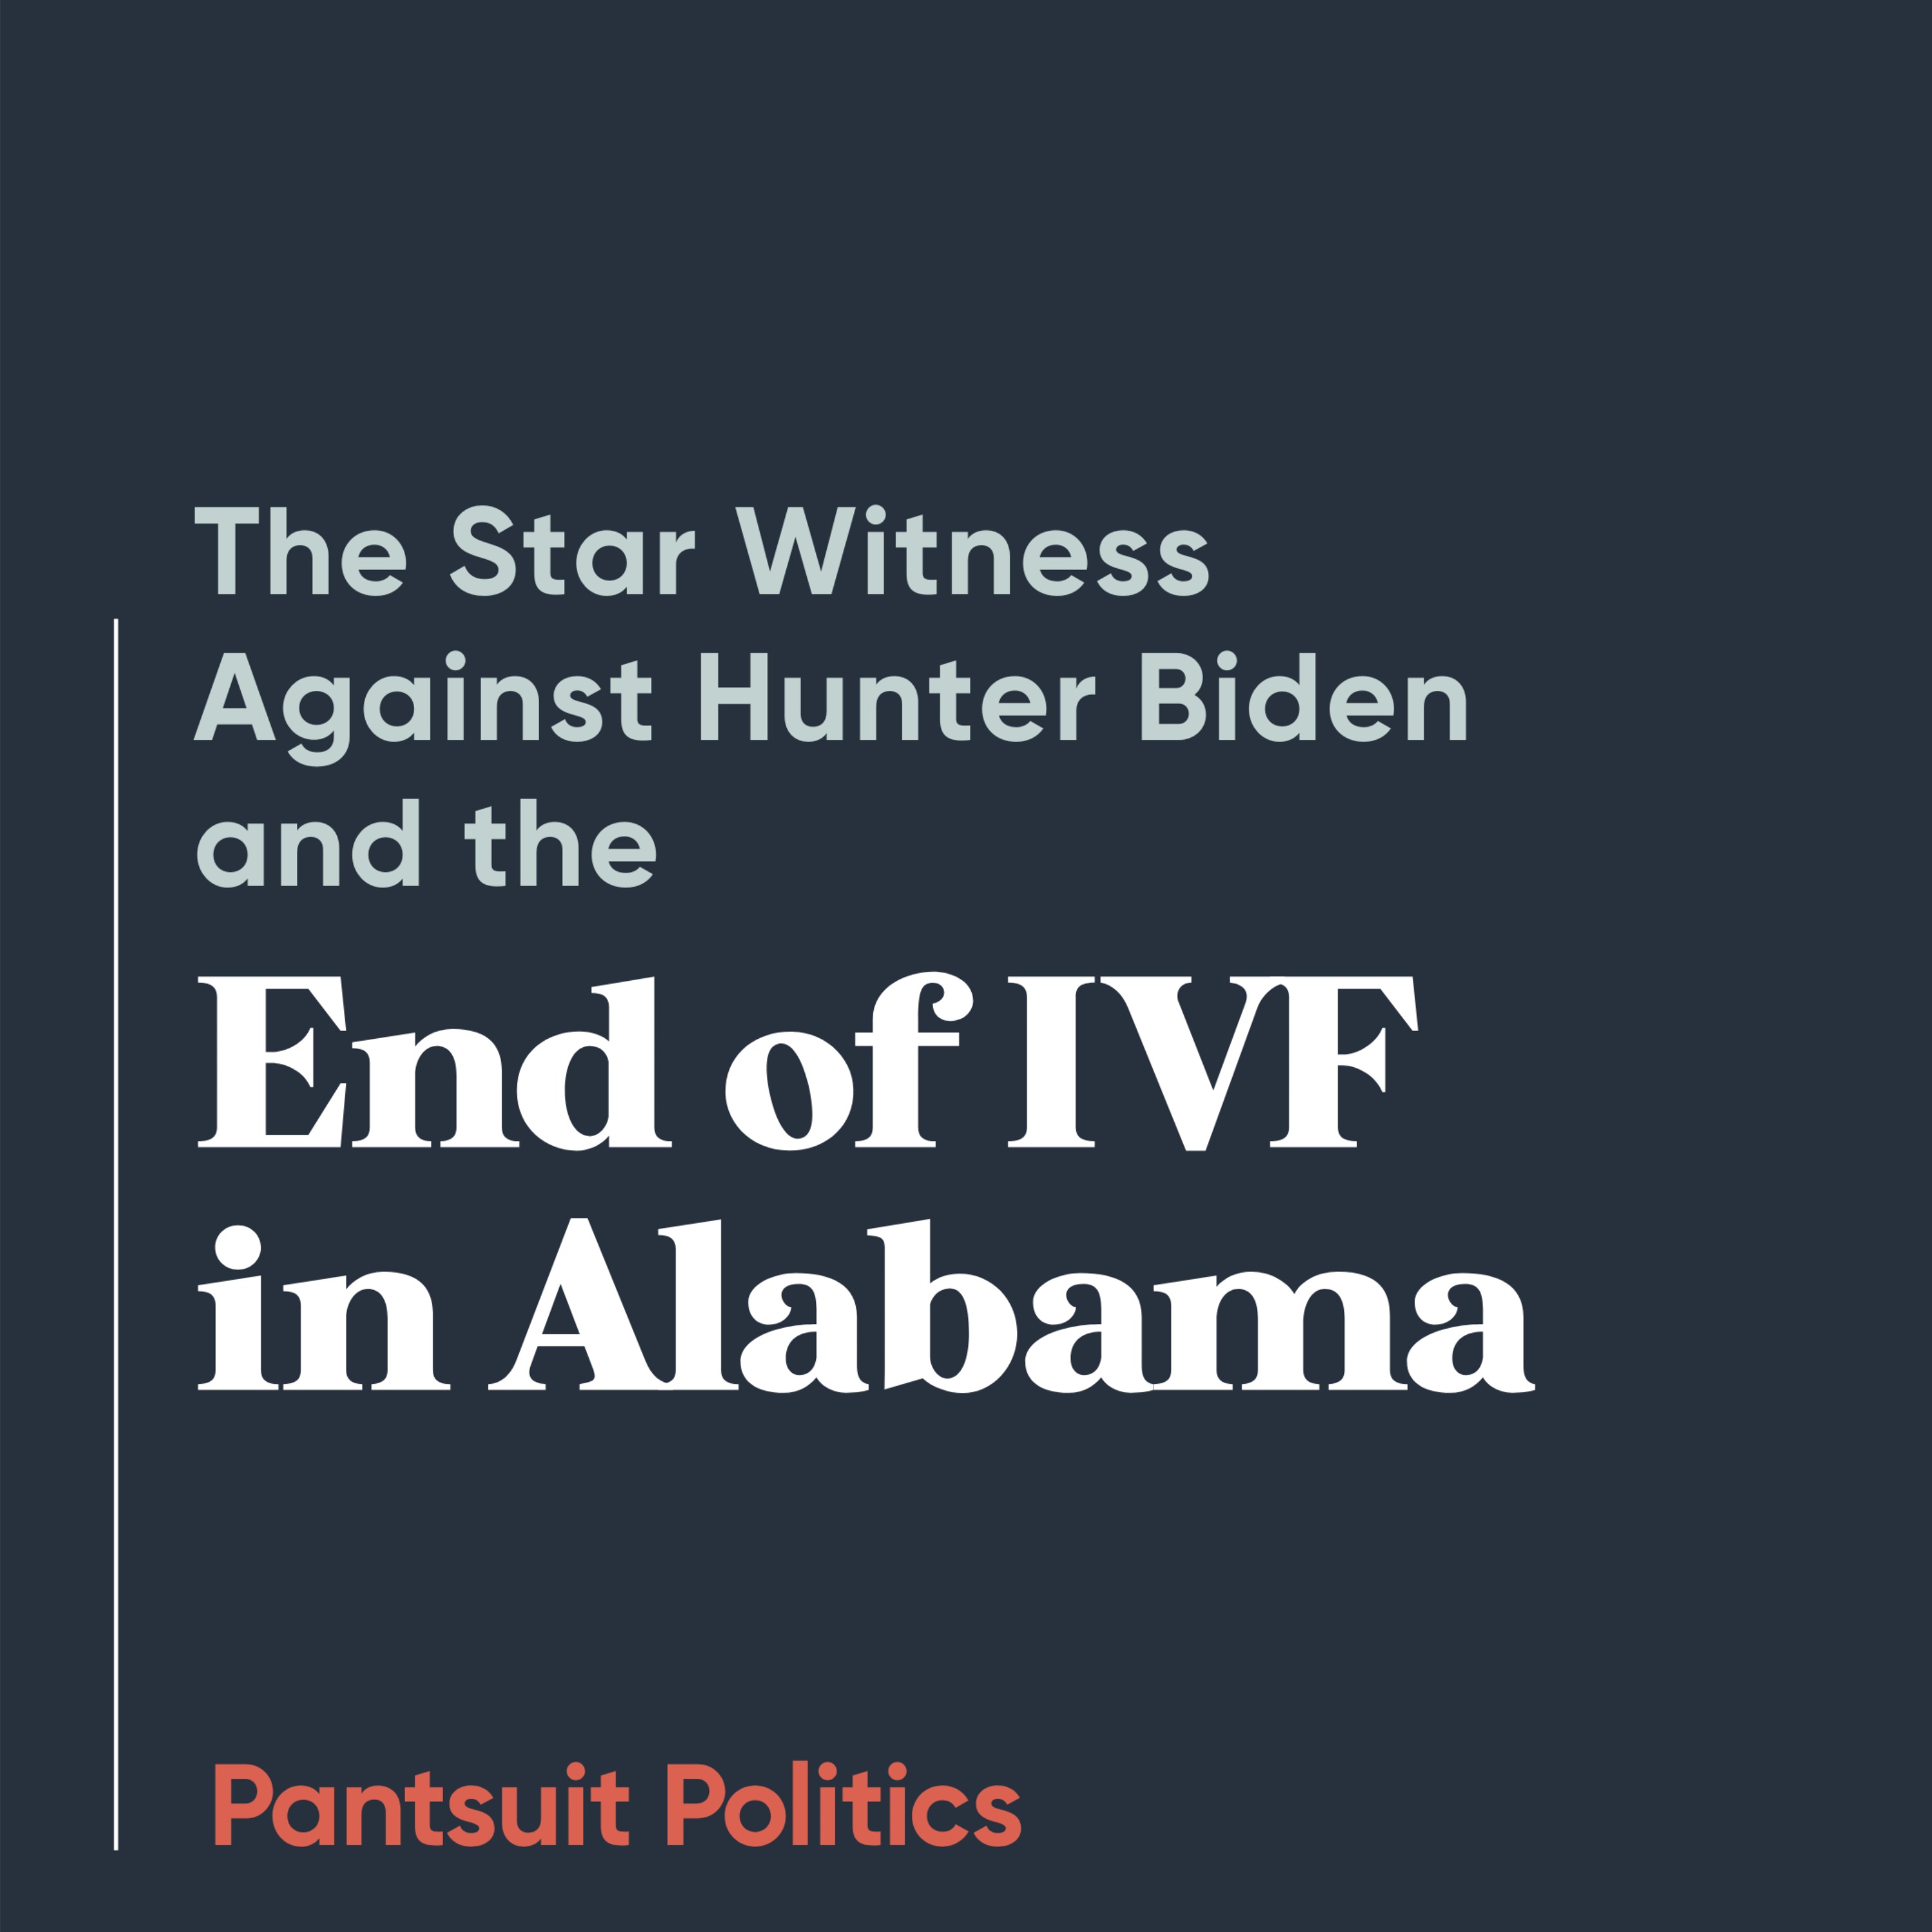 The Star Witness Against Hunter Biden and the End of IVF in Alabama